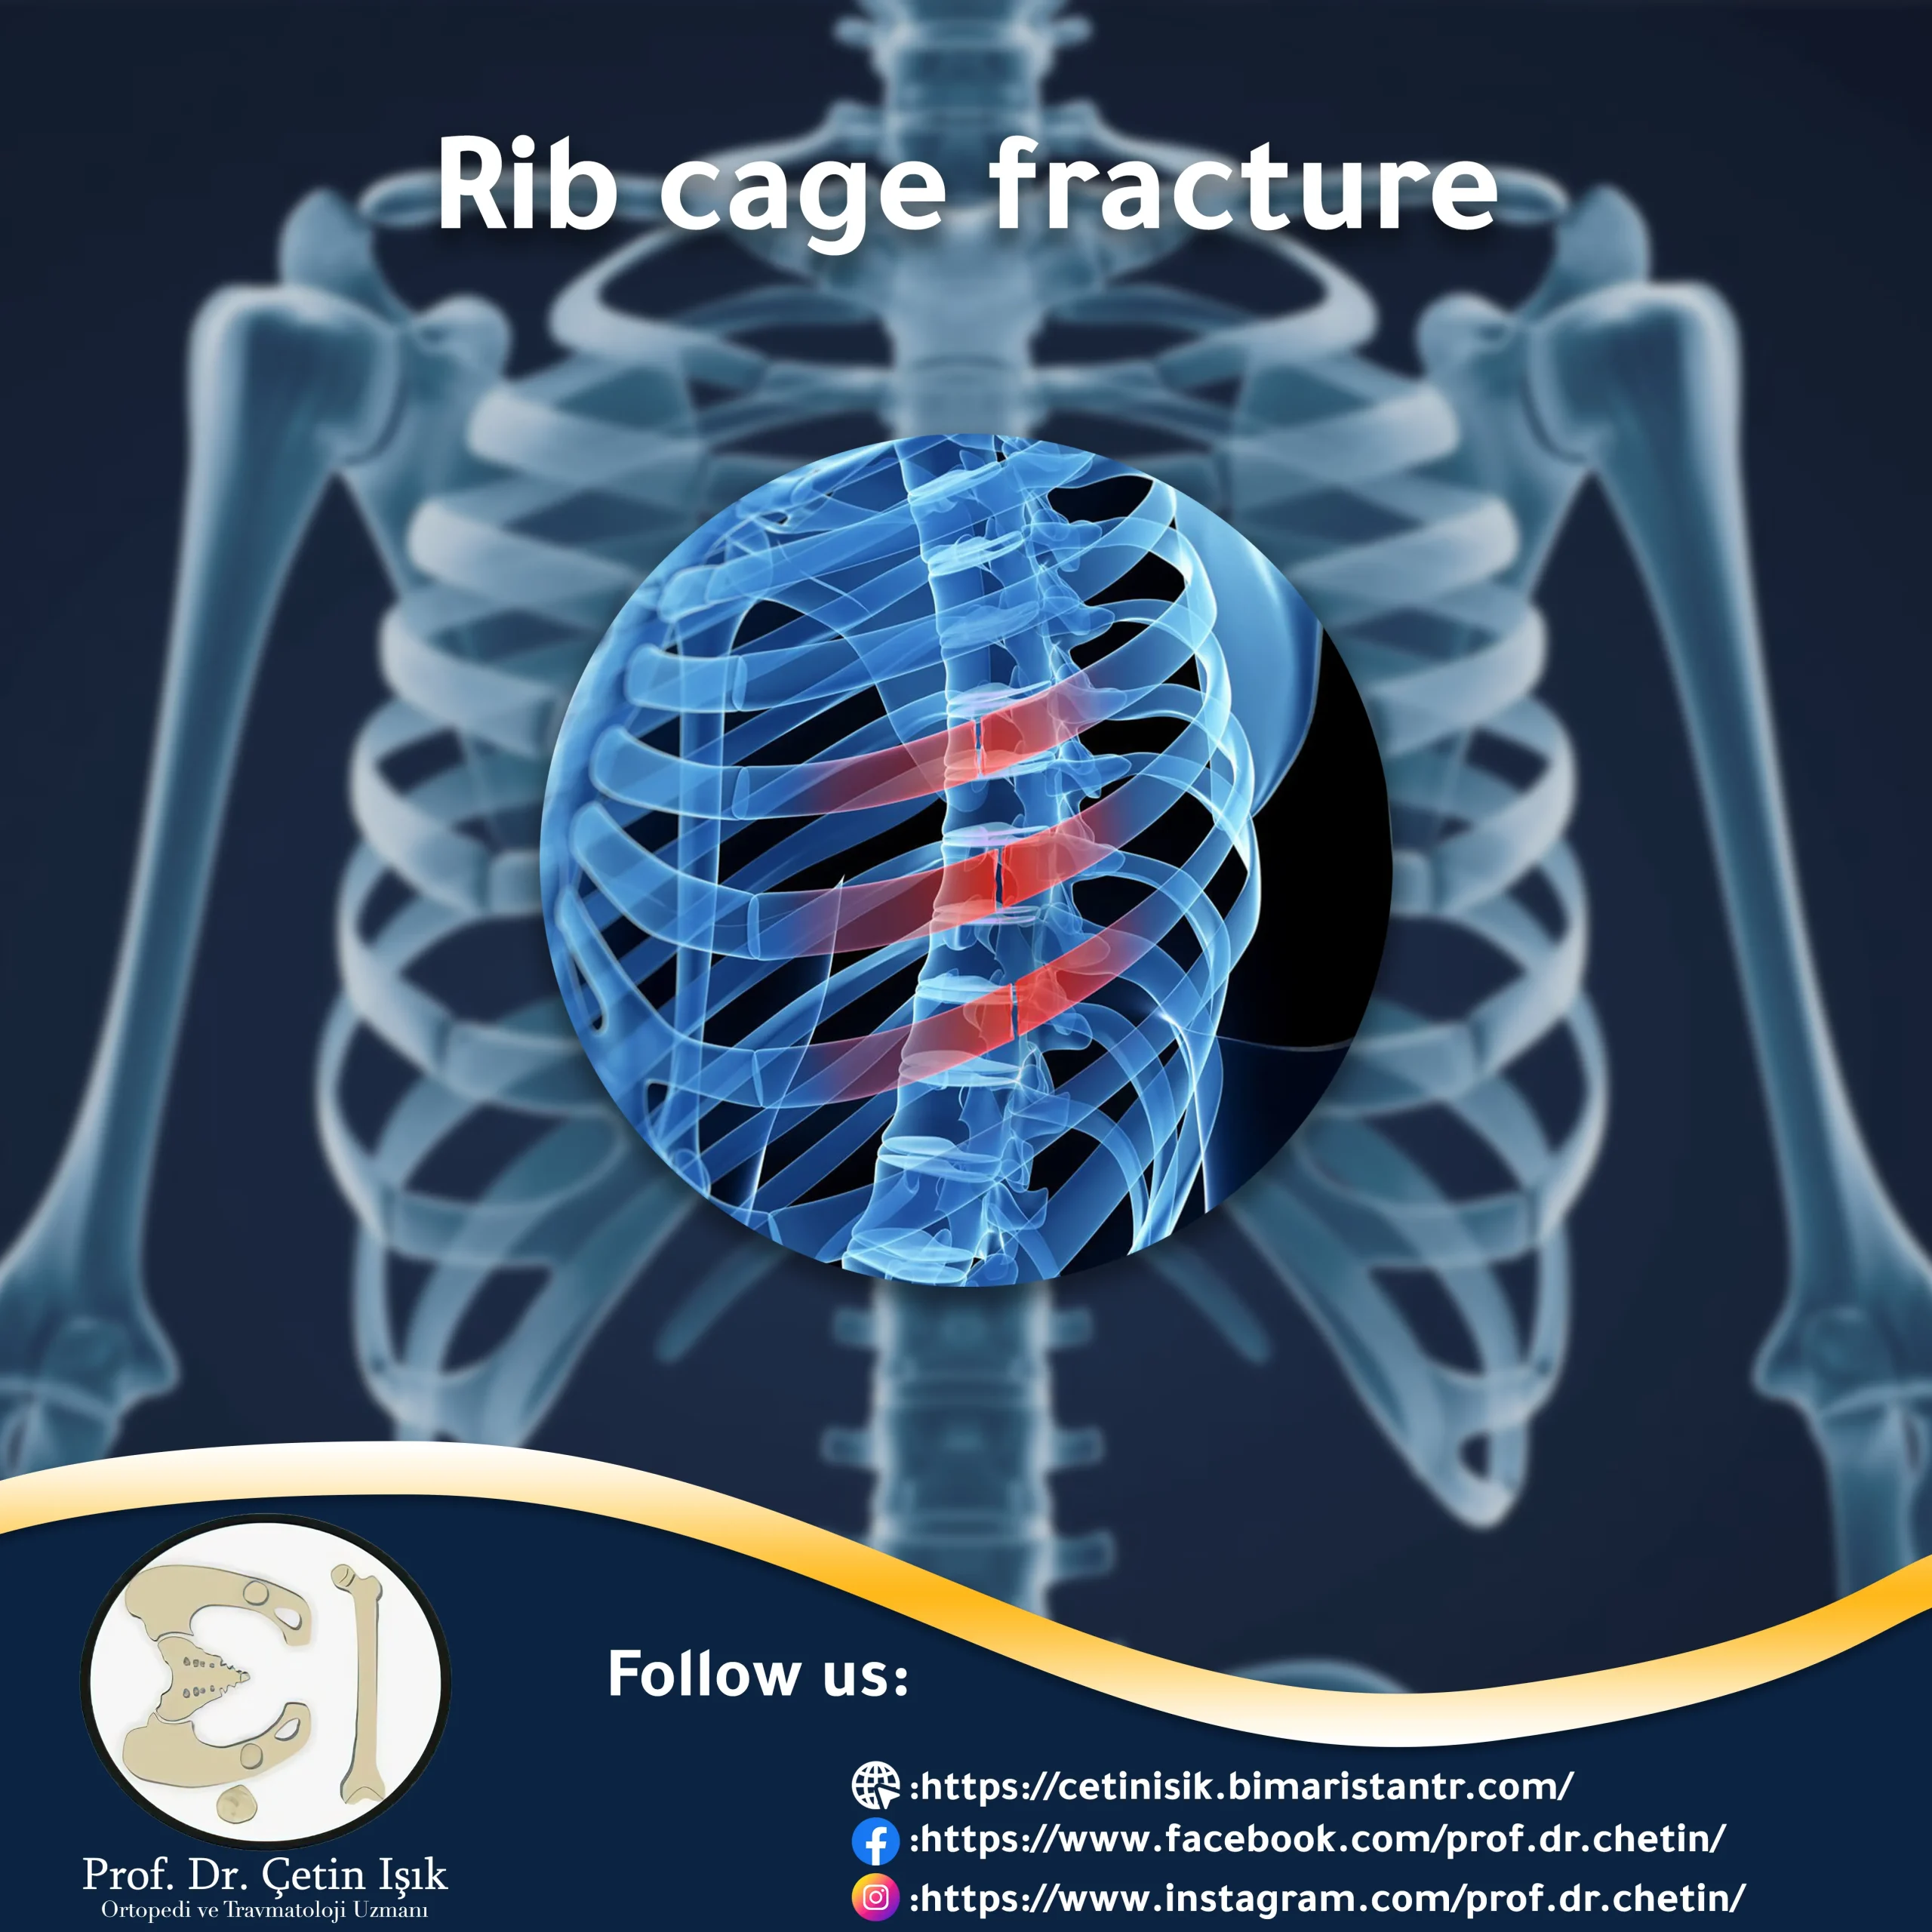 Rib cage fracture - ways to treat it without surgery